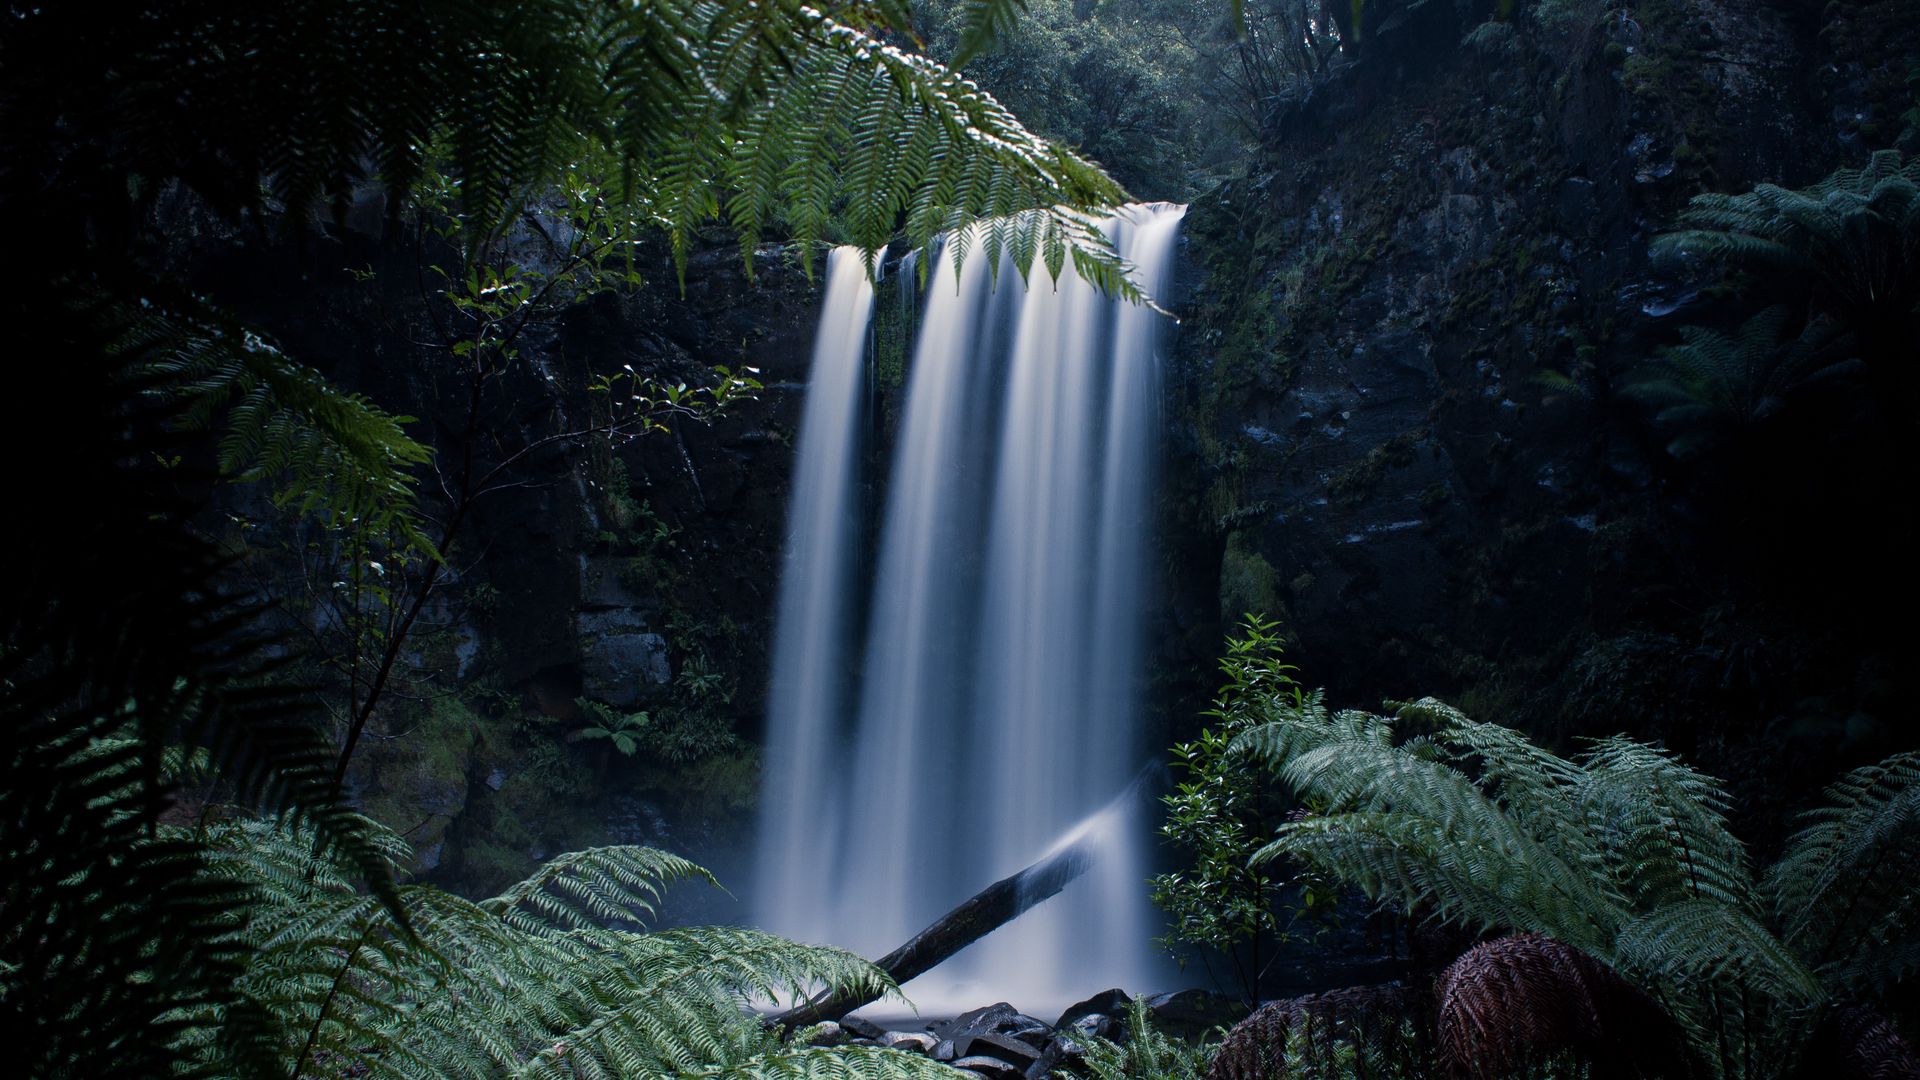 General 1920x1080 landscape nature rainforest waterfall leaves long exposure